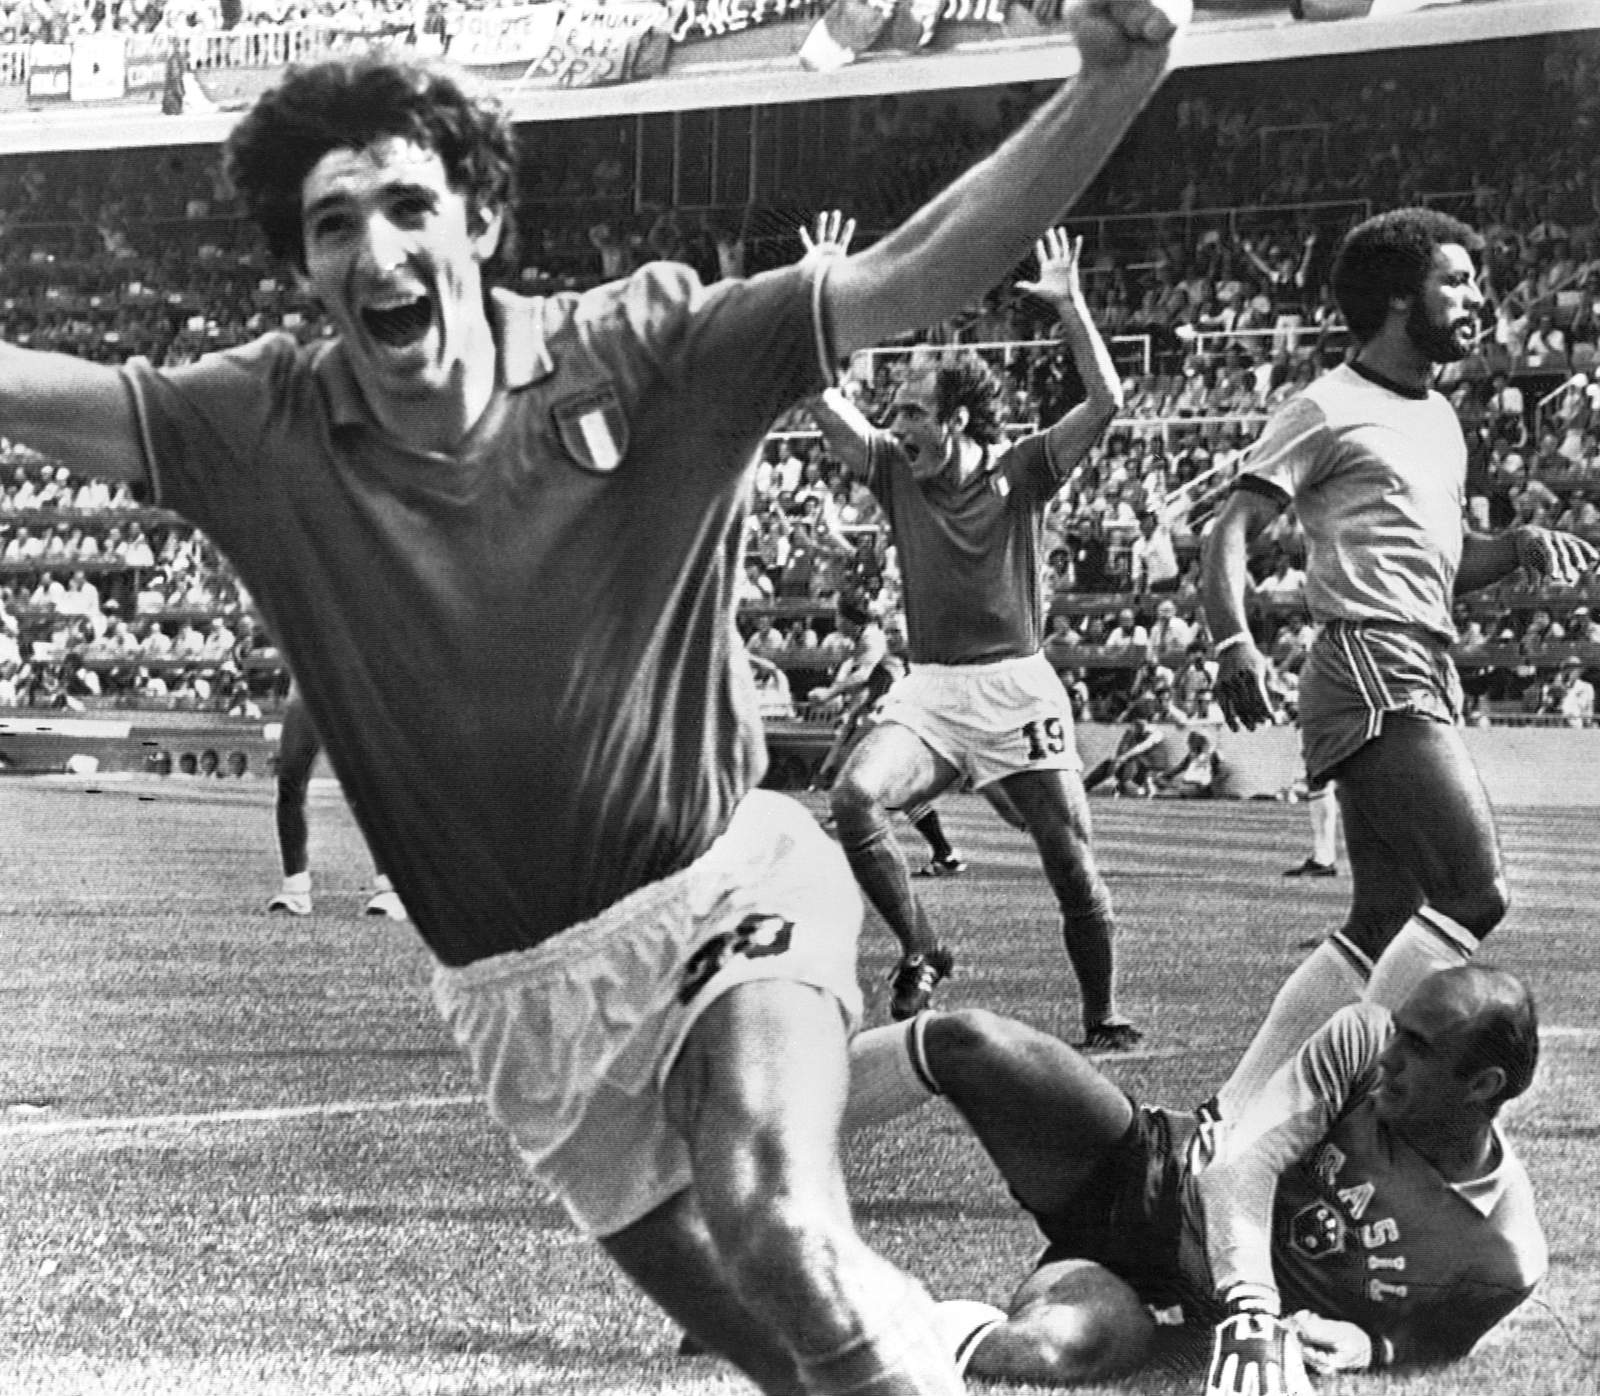 Paolo Rossi, who led Italy to 1982 World Cup, dies at 64